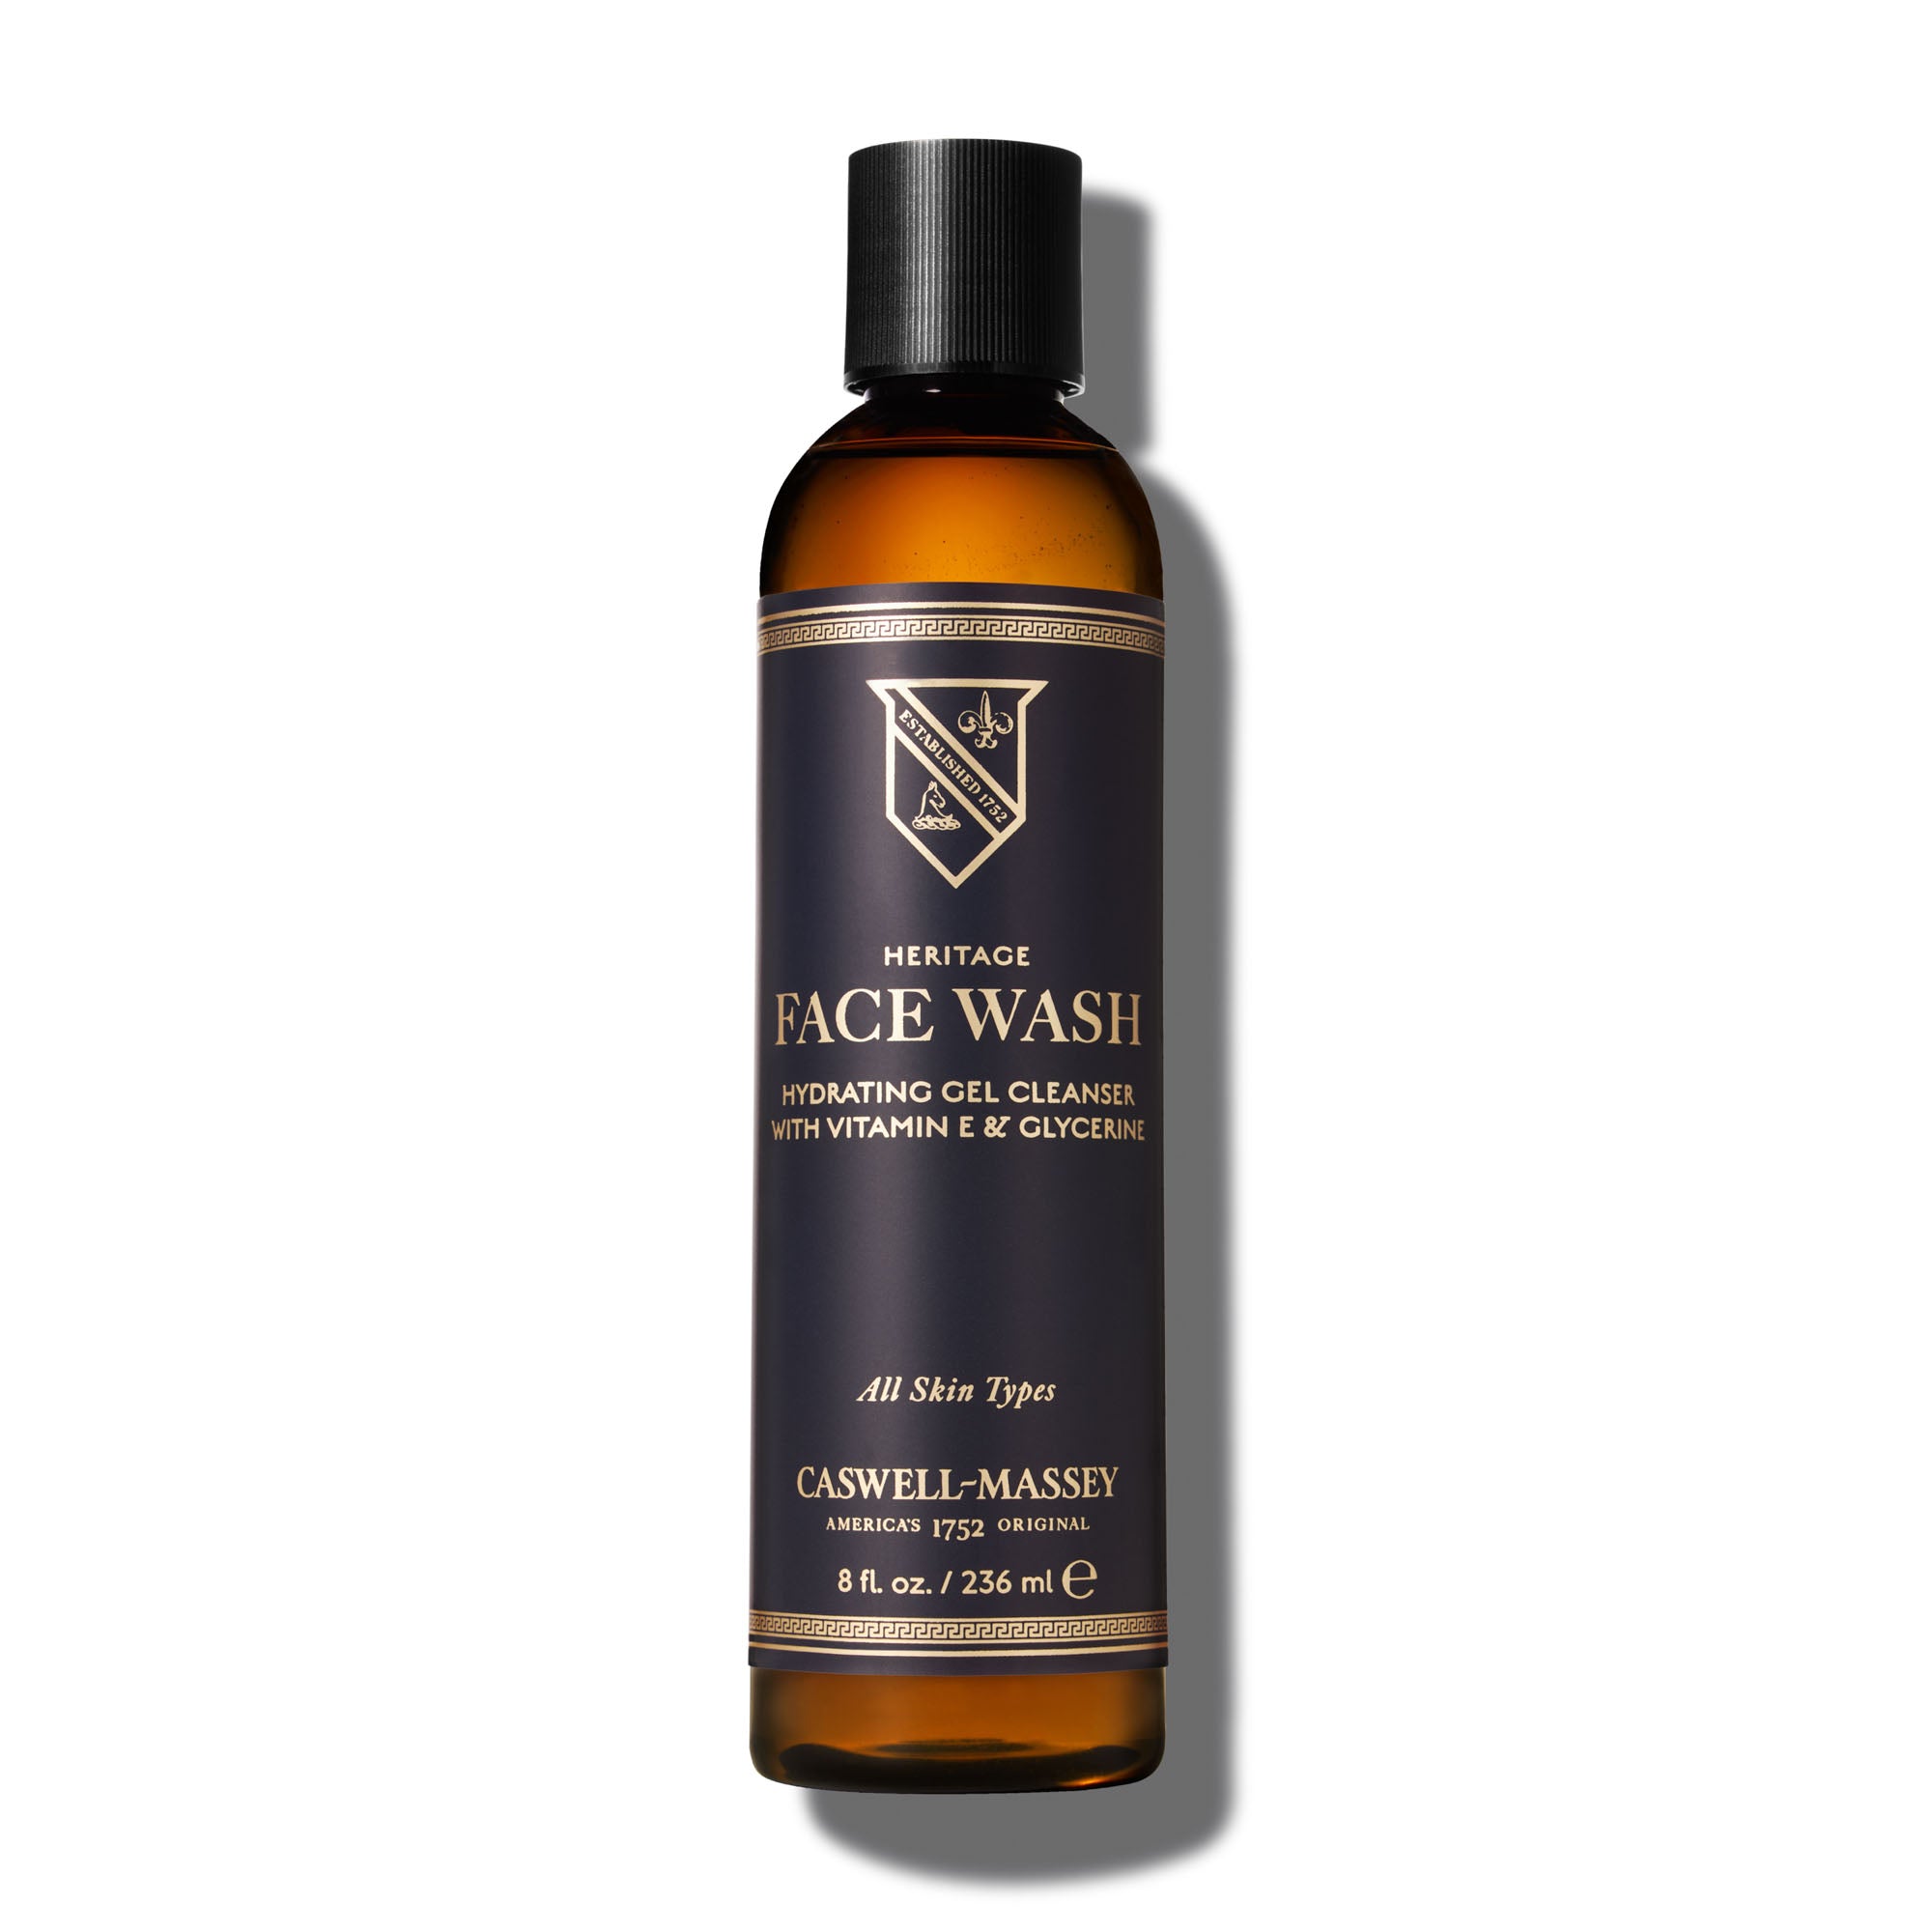 Caswell-Massey Hydrating, Cleansing Heritage Face Wash